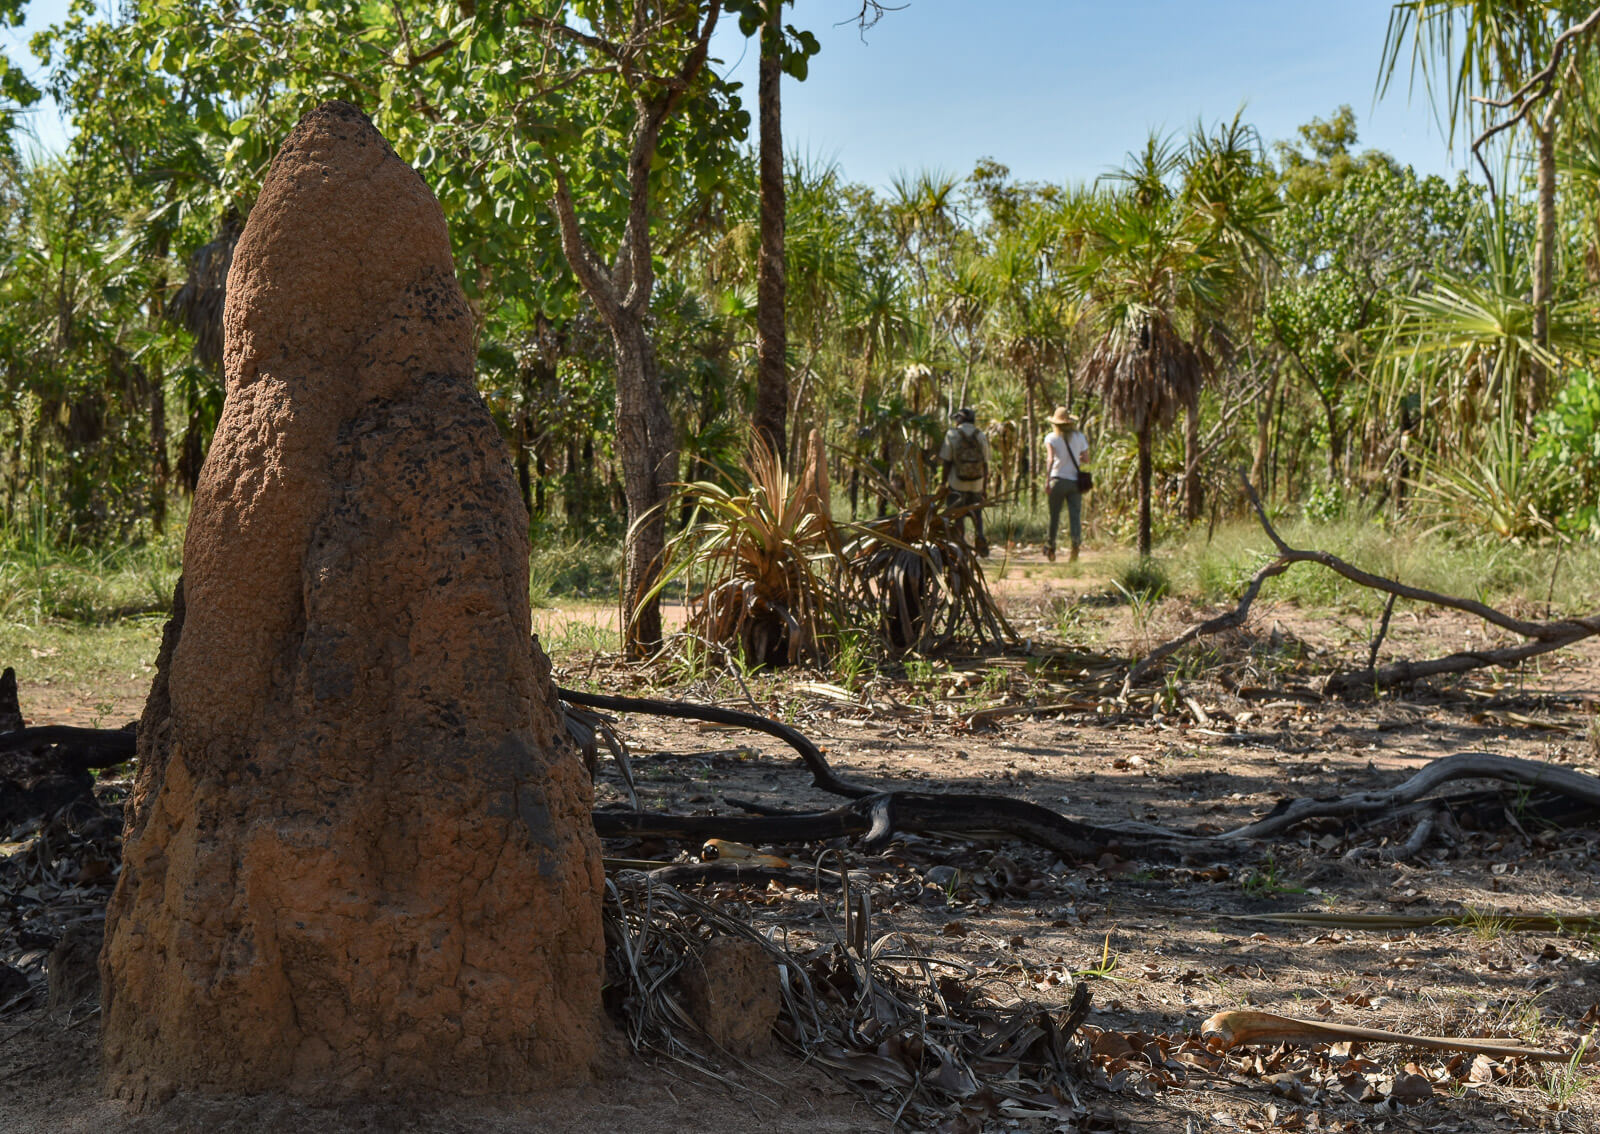 A termite mound with people walking in the distance 